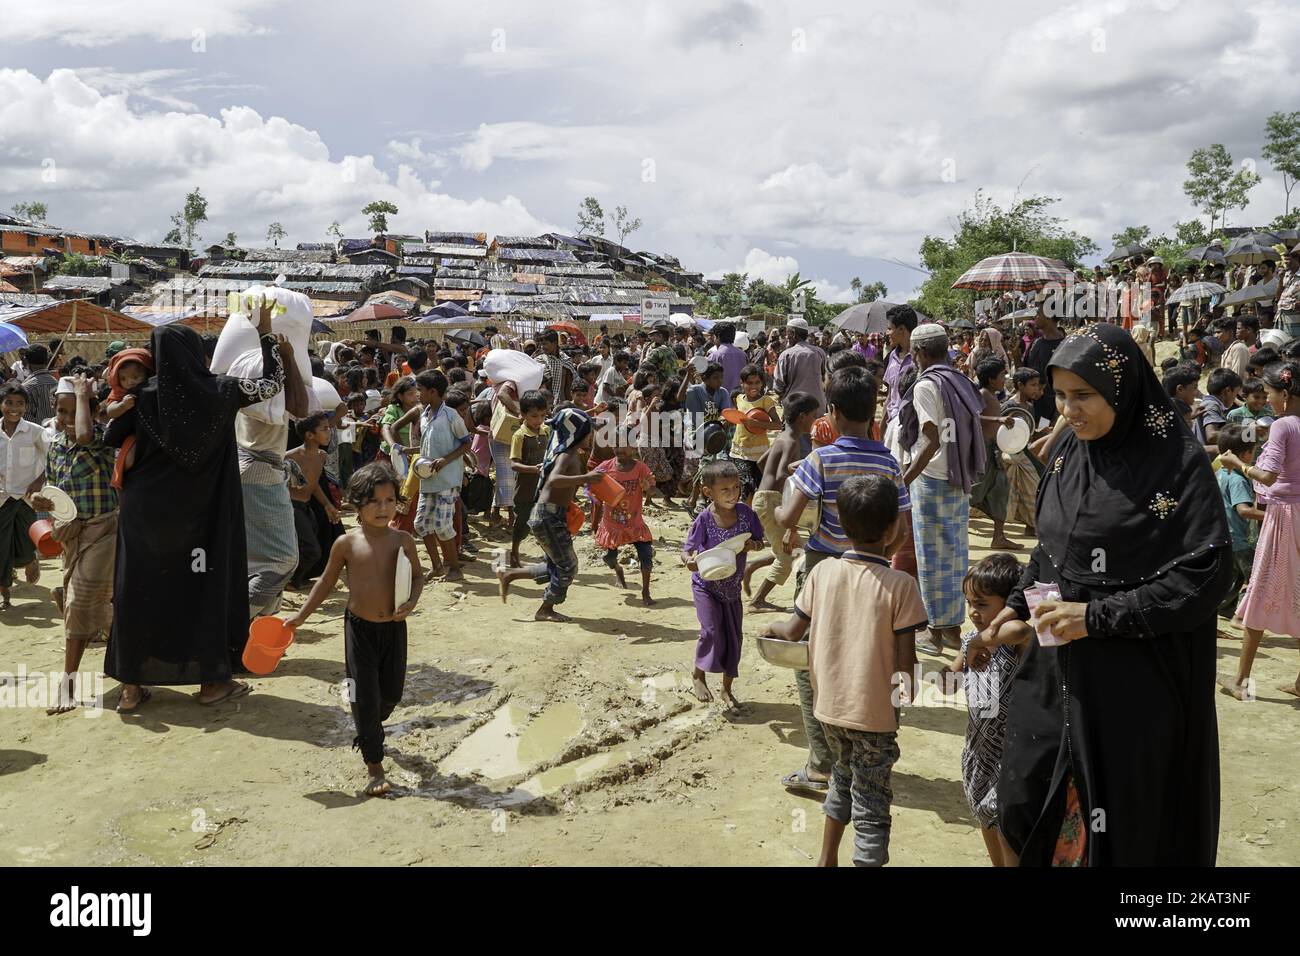 Rohingya refugees live in Moiner Ghona Camp on 17 October 2017. Moiner Ghona Camp is a Rohingya Refugee Camp near the Bangladesh and Myanmar land border. More and more Rohingya continue to cross the Bangladesh border via land and sea, and nearly a million have fled persecution from Myanmar to date. (Photo by Jade Sacker/NurPhoto) Stock Photo